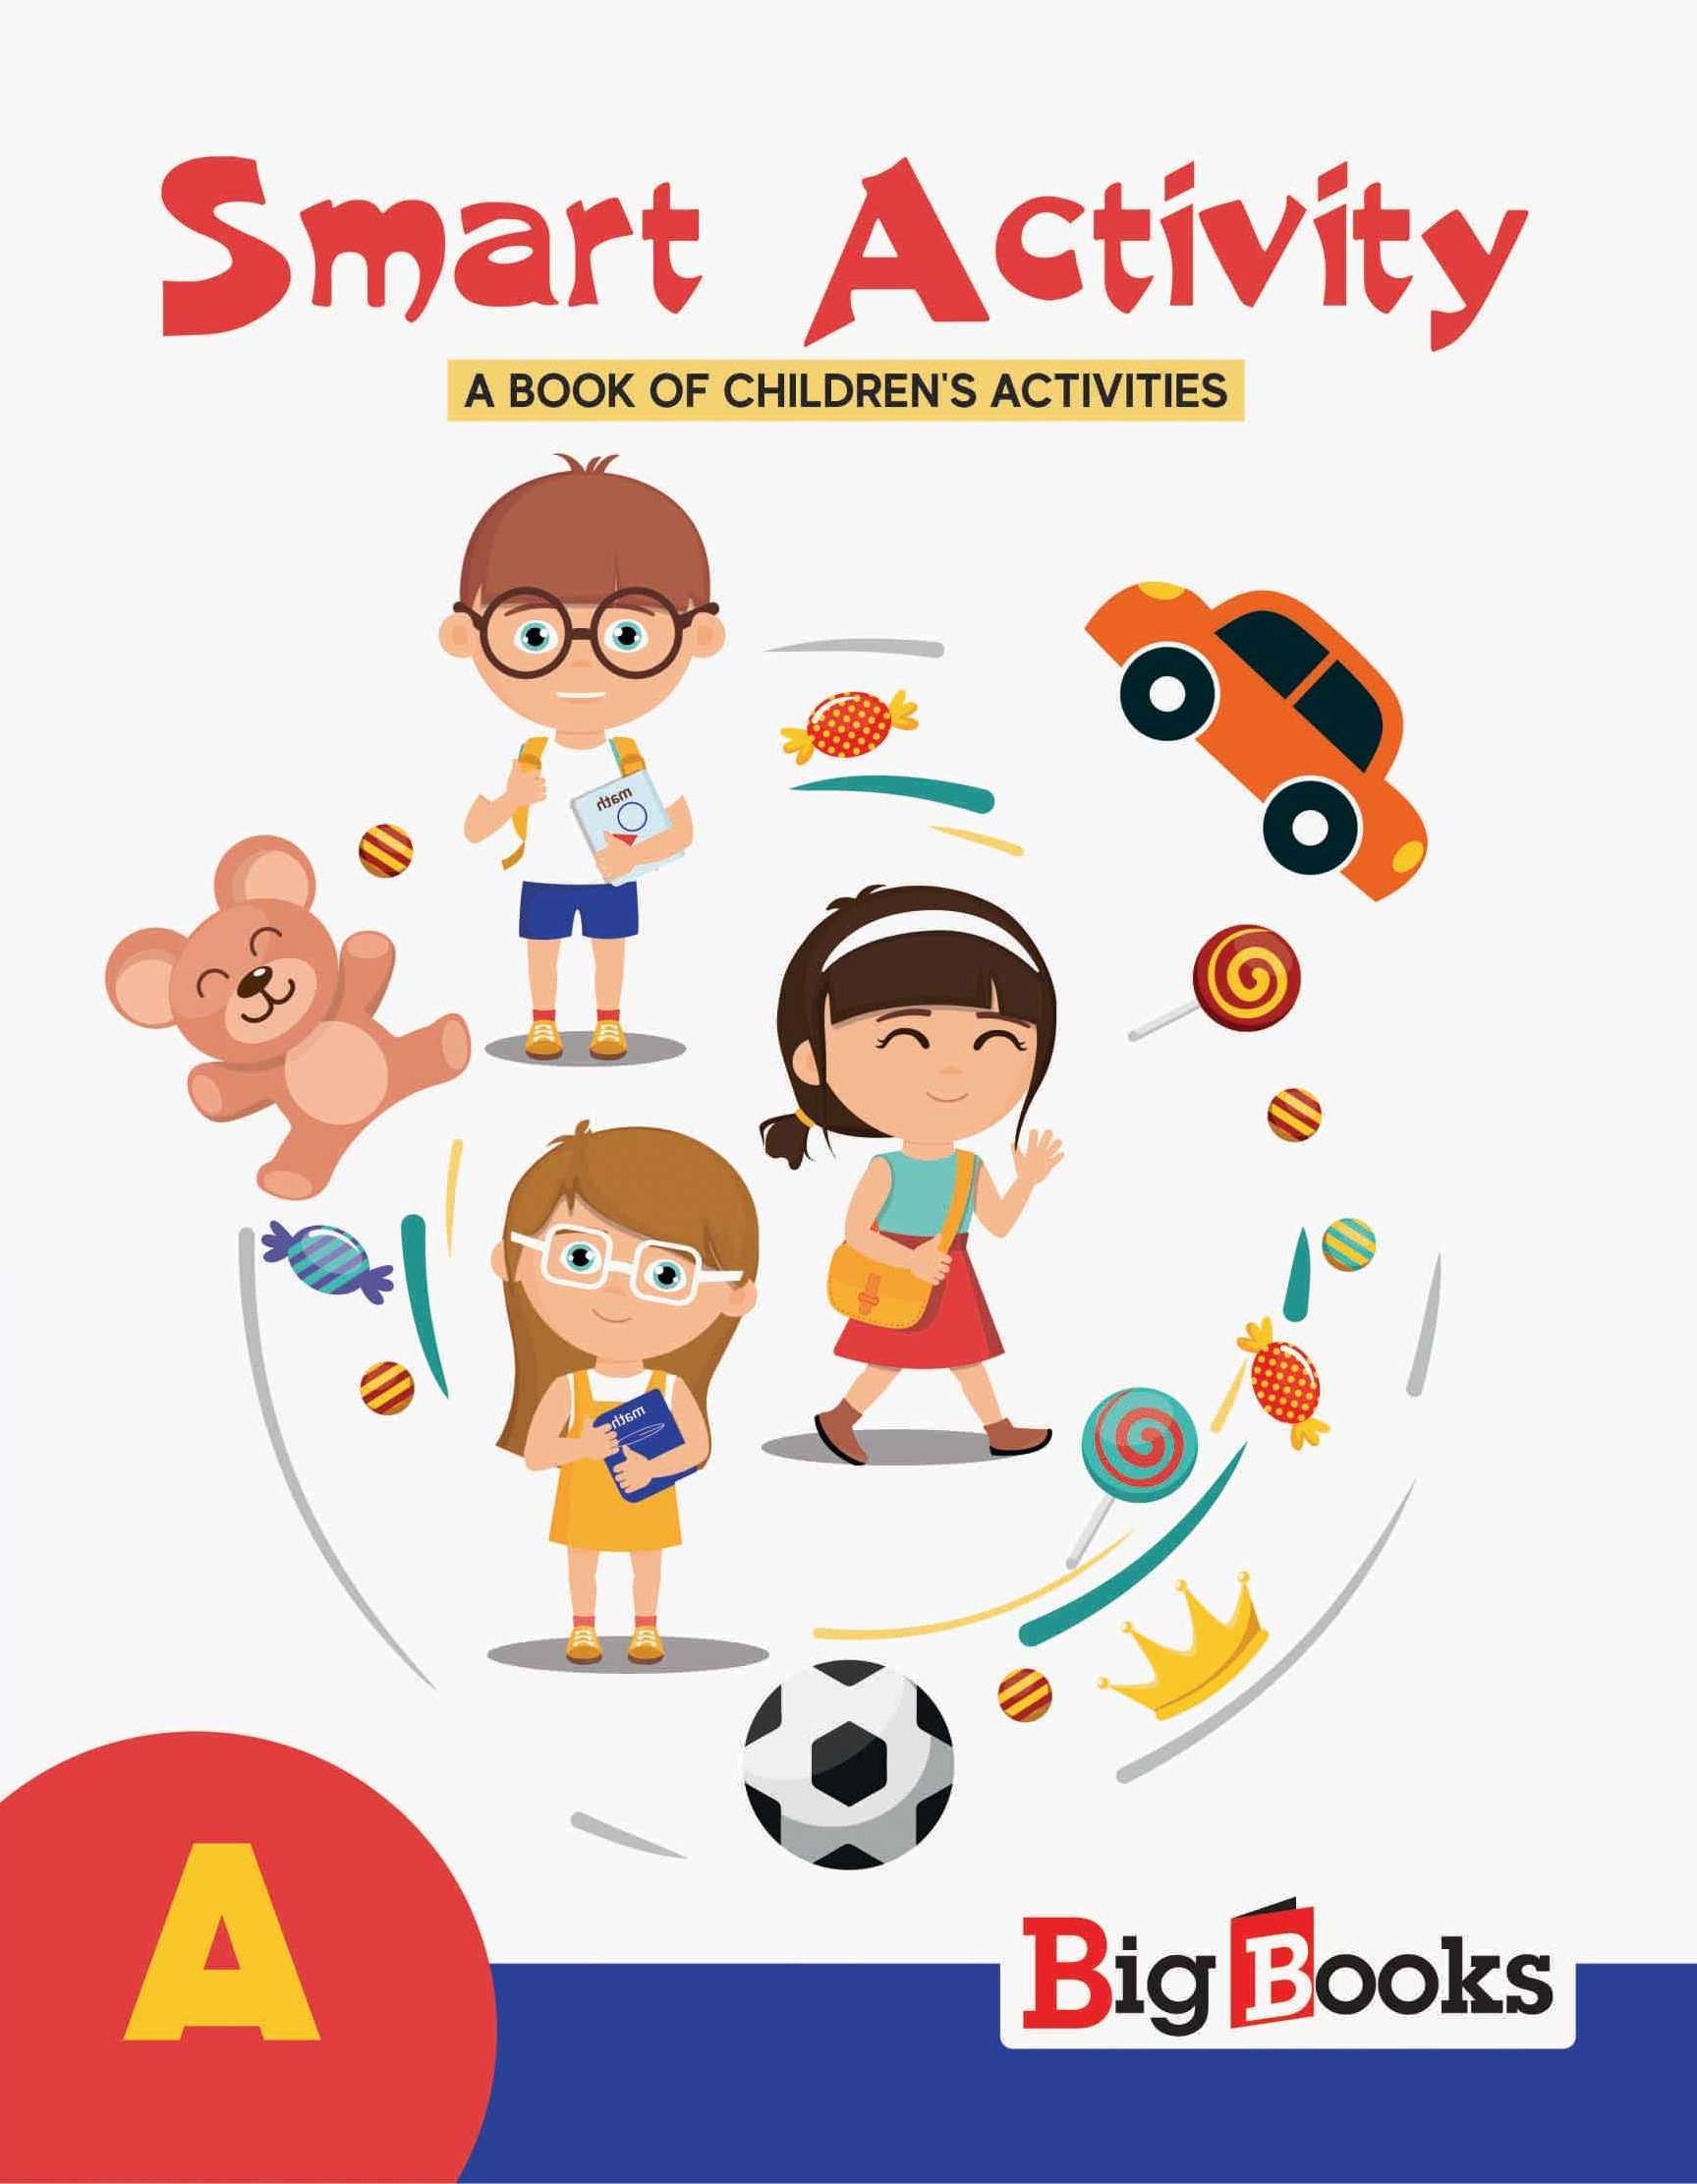 Buy smart activity book for 1